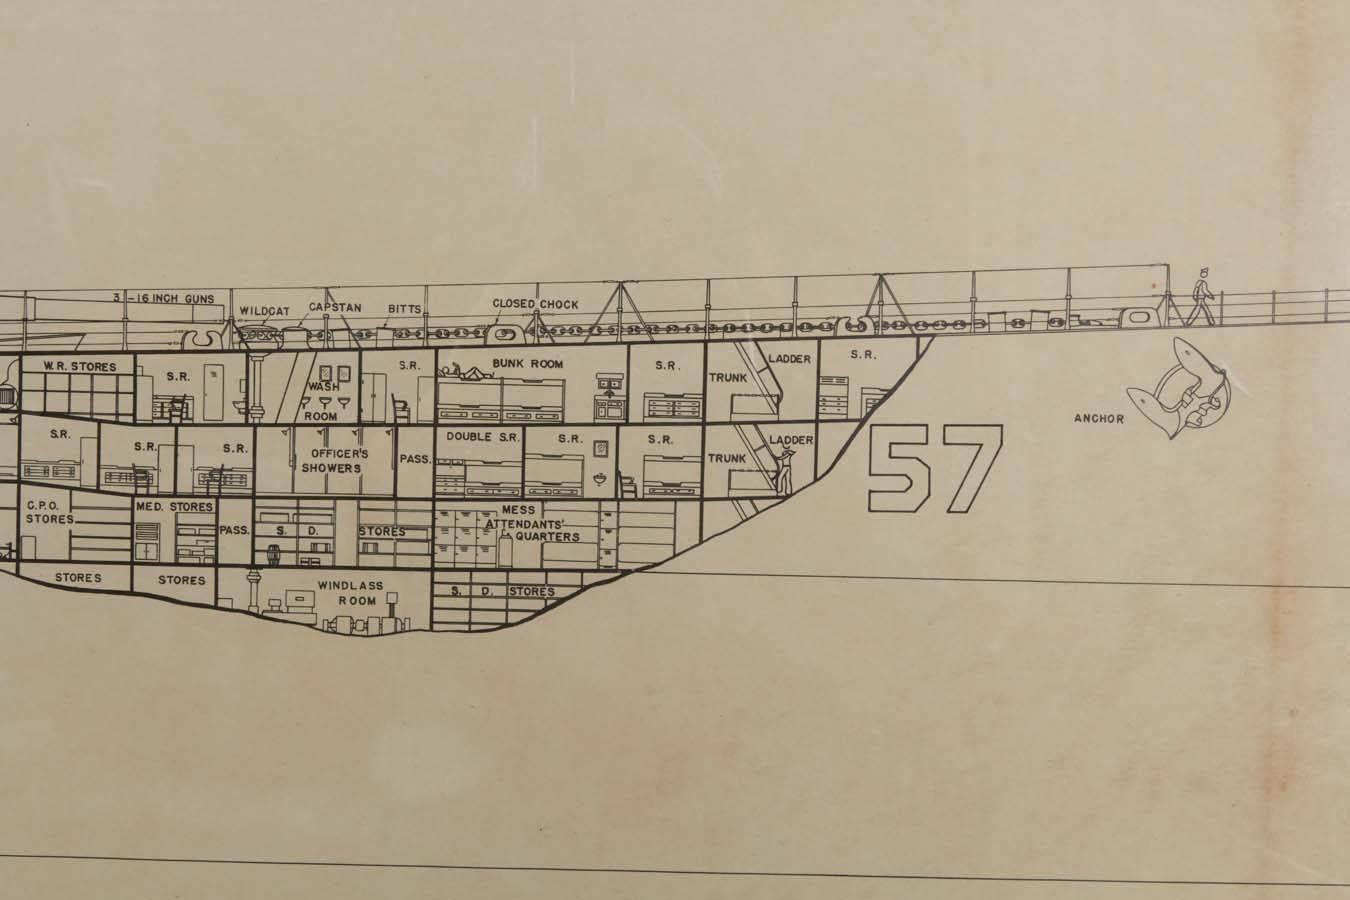 Large scale World War II era battleship diagram. Dated Dec 7th 1942 and signed J.R. Harris. Depicts the interior spaces of a "typical battleship." The piece is in good, vintage condition with some patina and watermarks that add to the